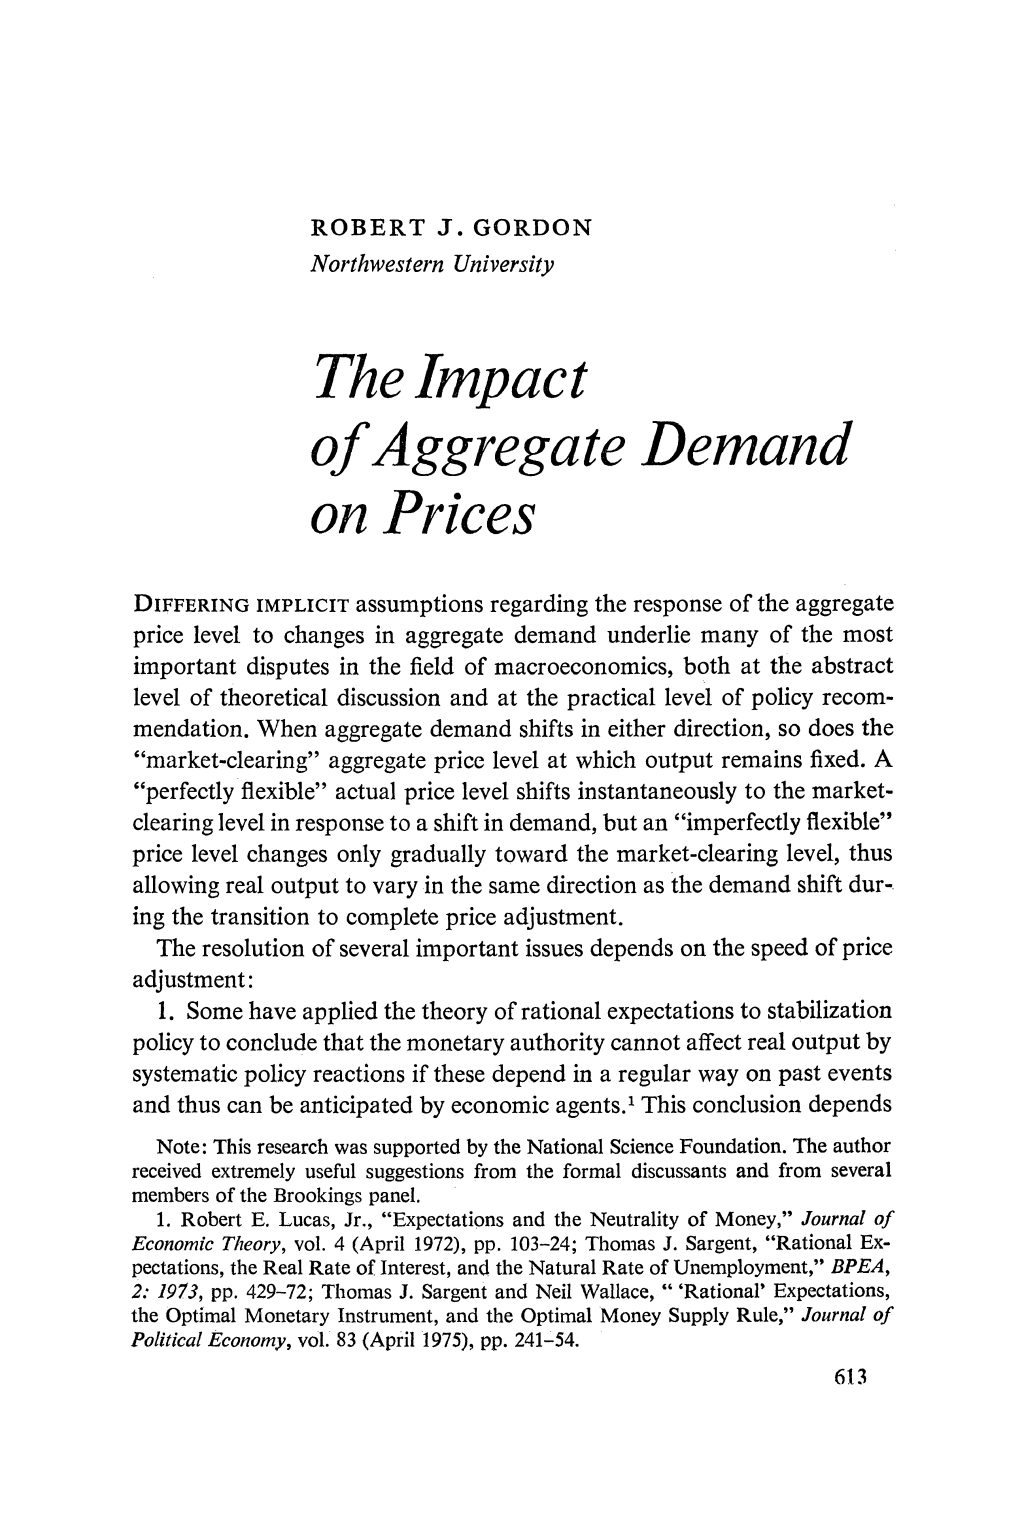 The Impact of Aggregate Demand on Prices